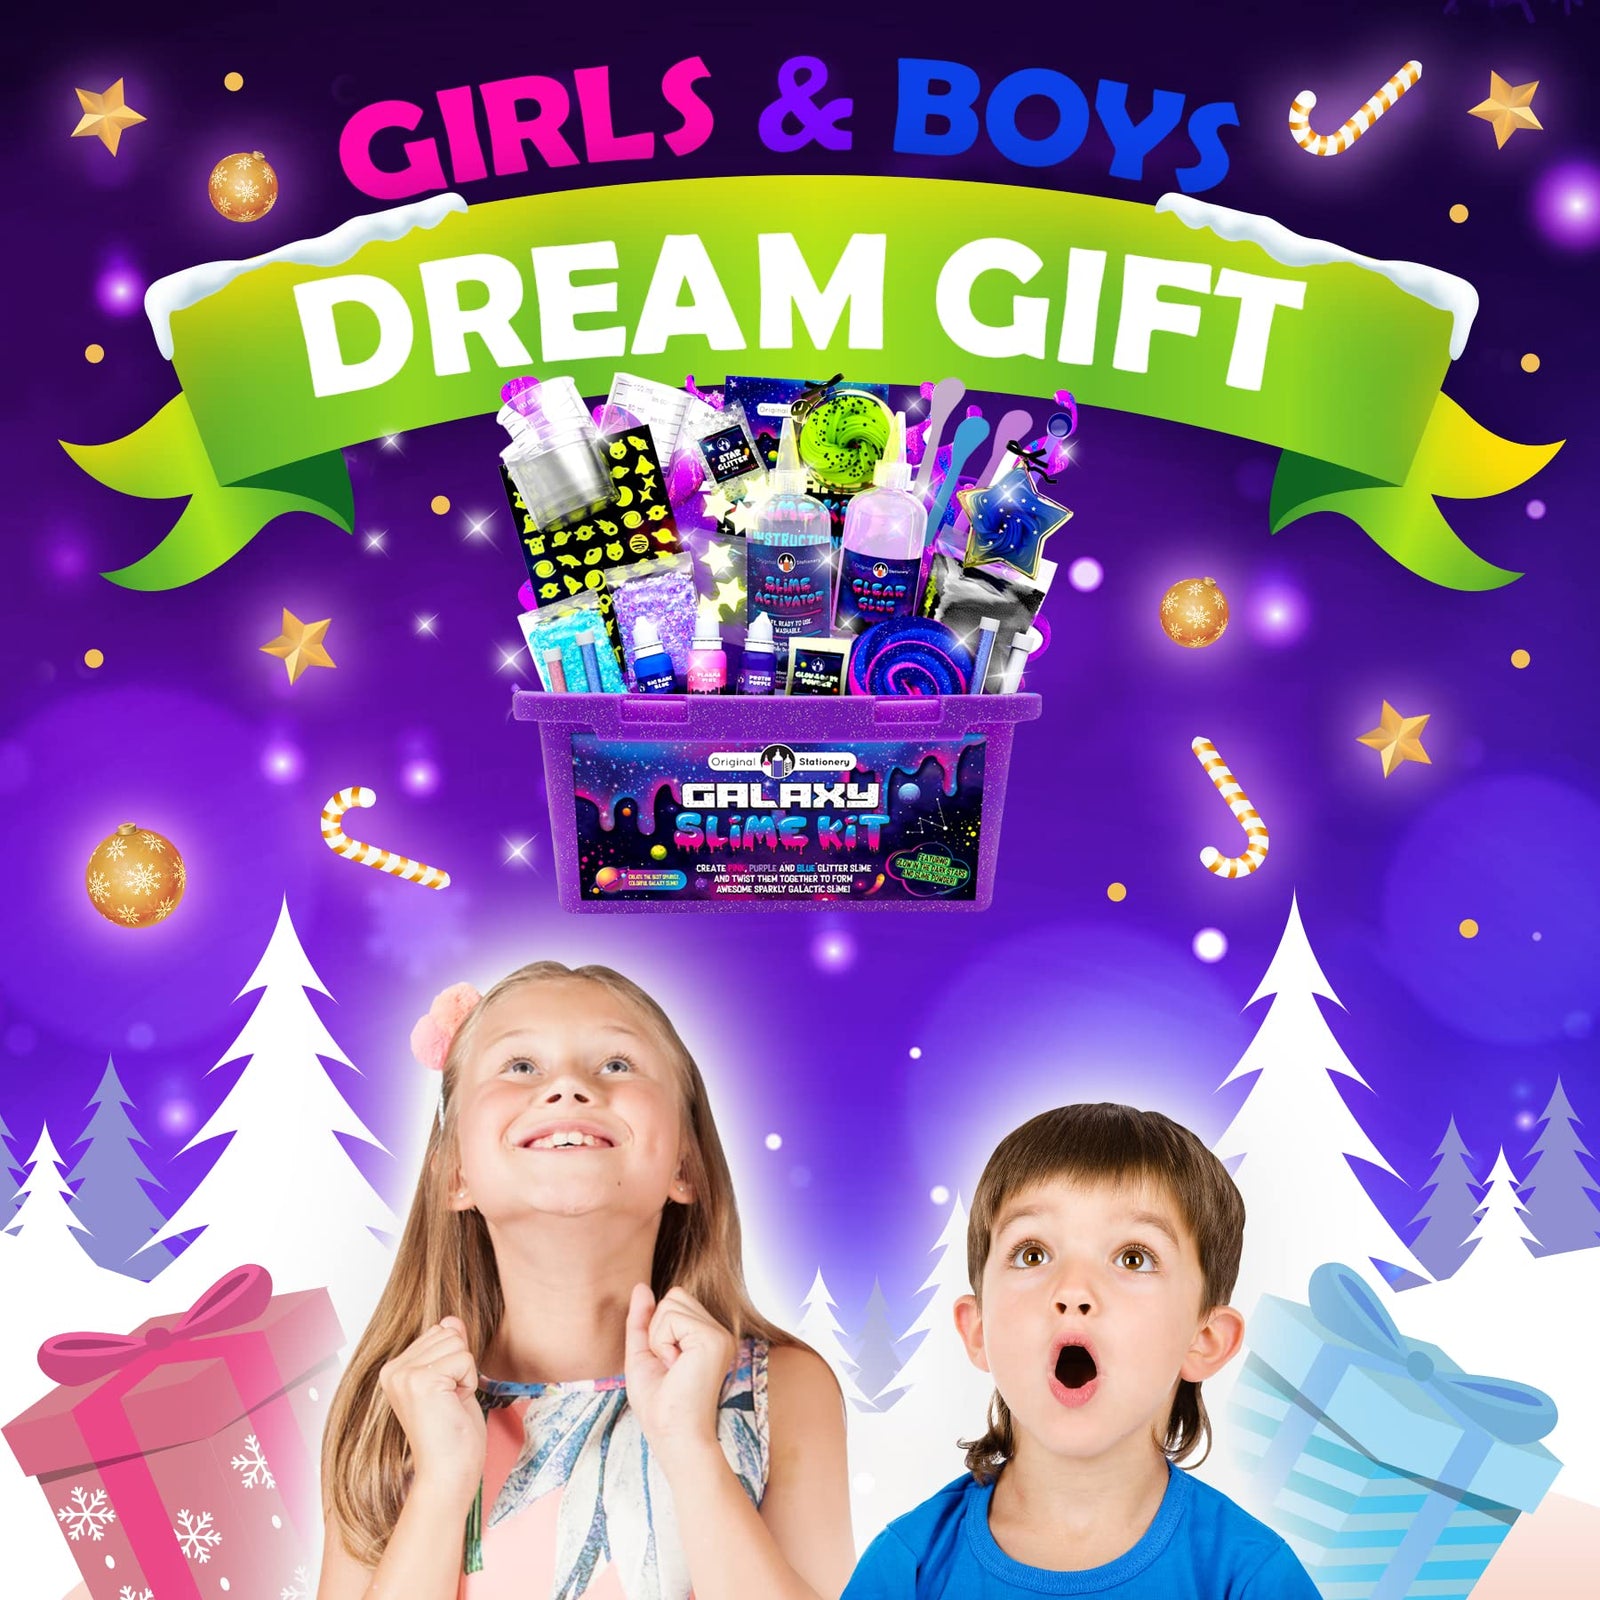 Original Stationery Galaxy Slime Making Kit with Glow in The Dark Stars to Make Glitter Galactic Slime! Slime Kits for Girls and Boys